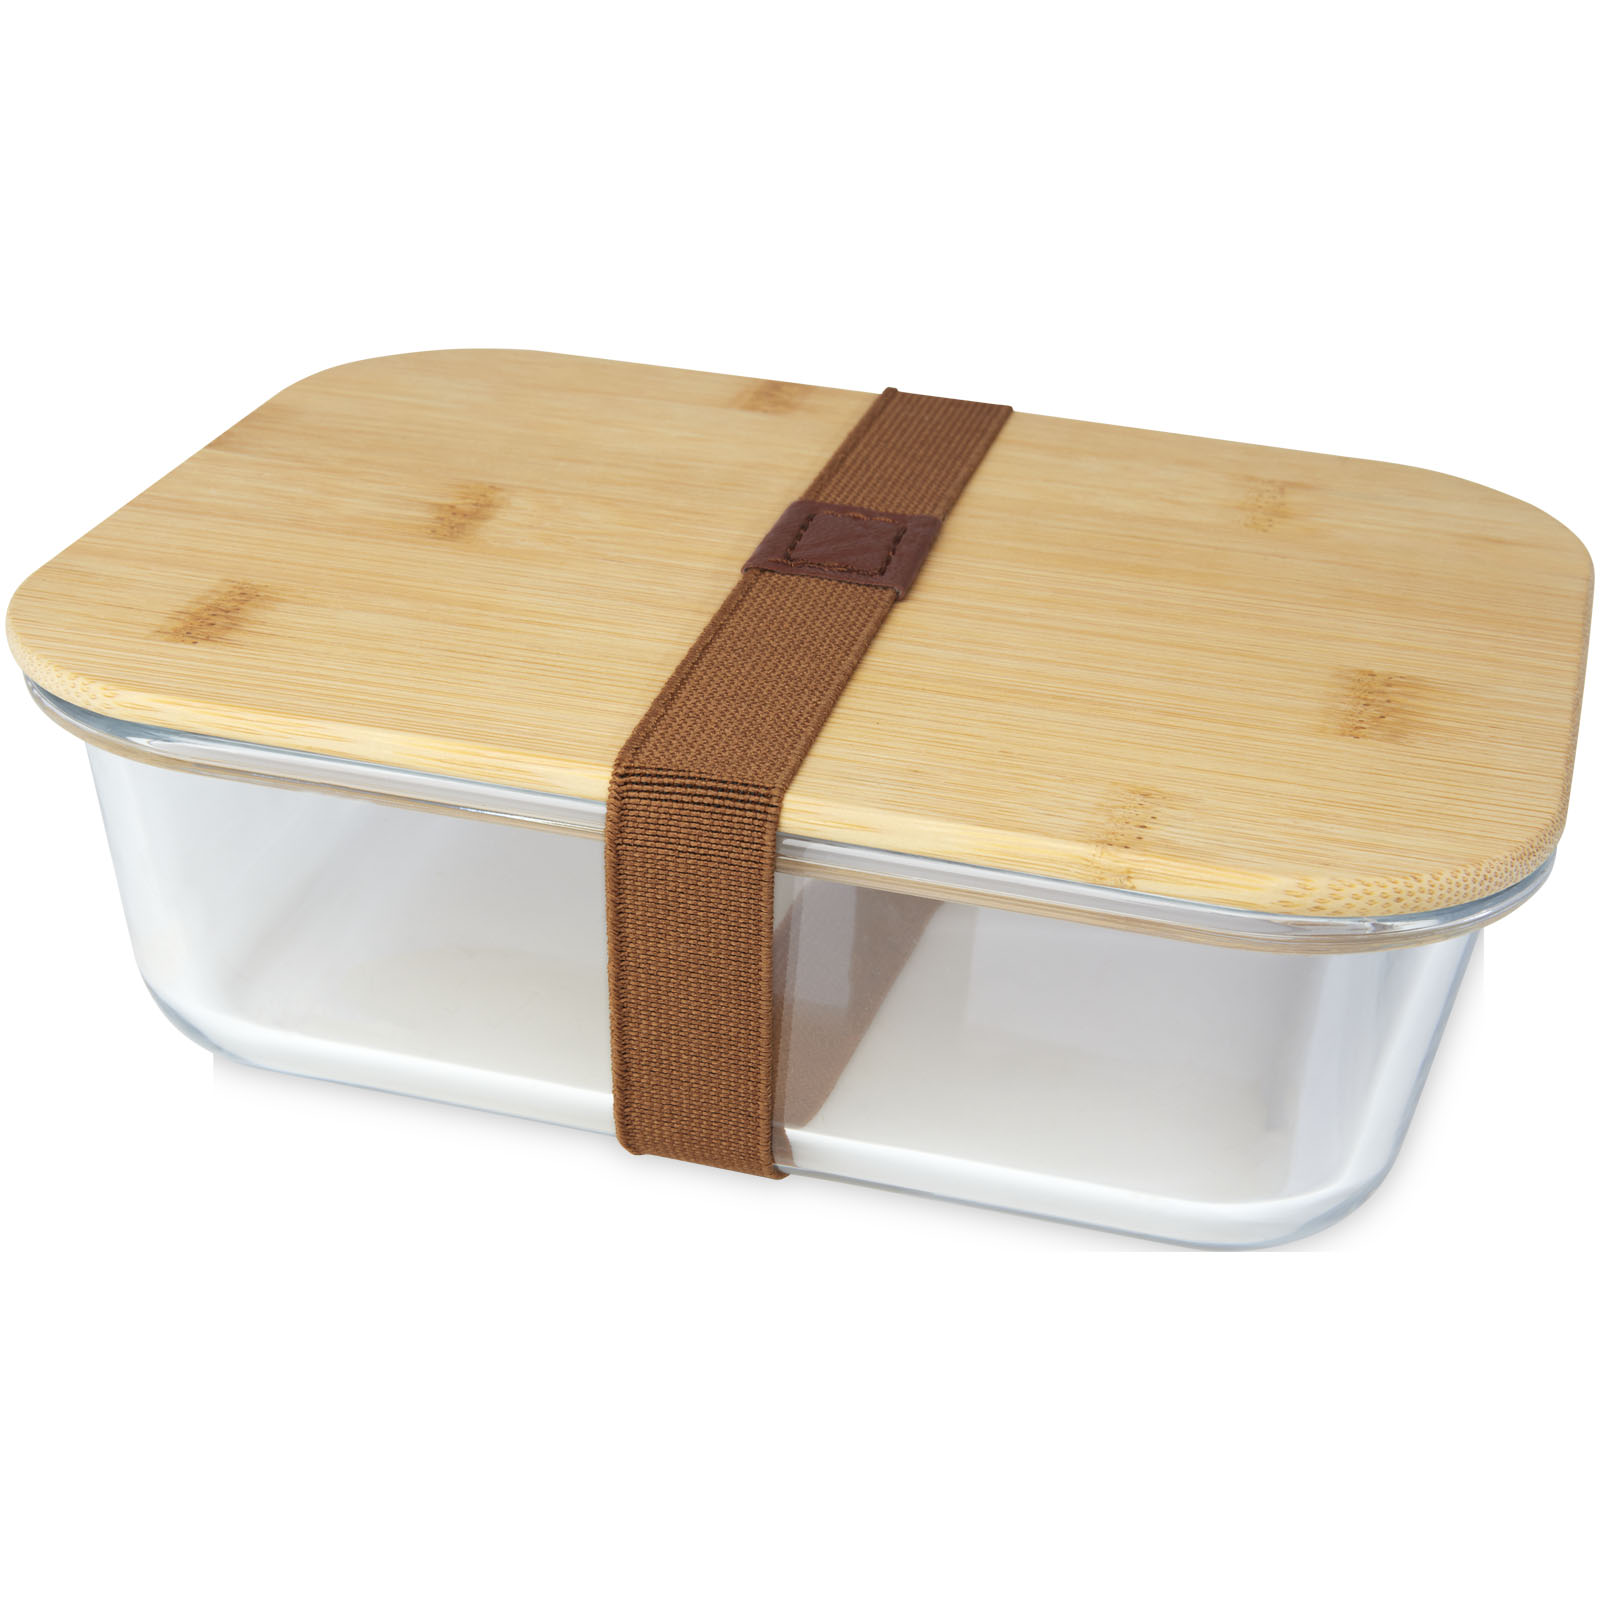 A red glass lunch box with a bamboo cover - Ferndown